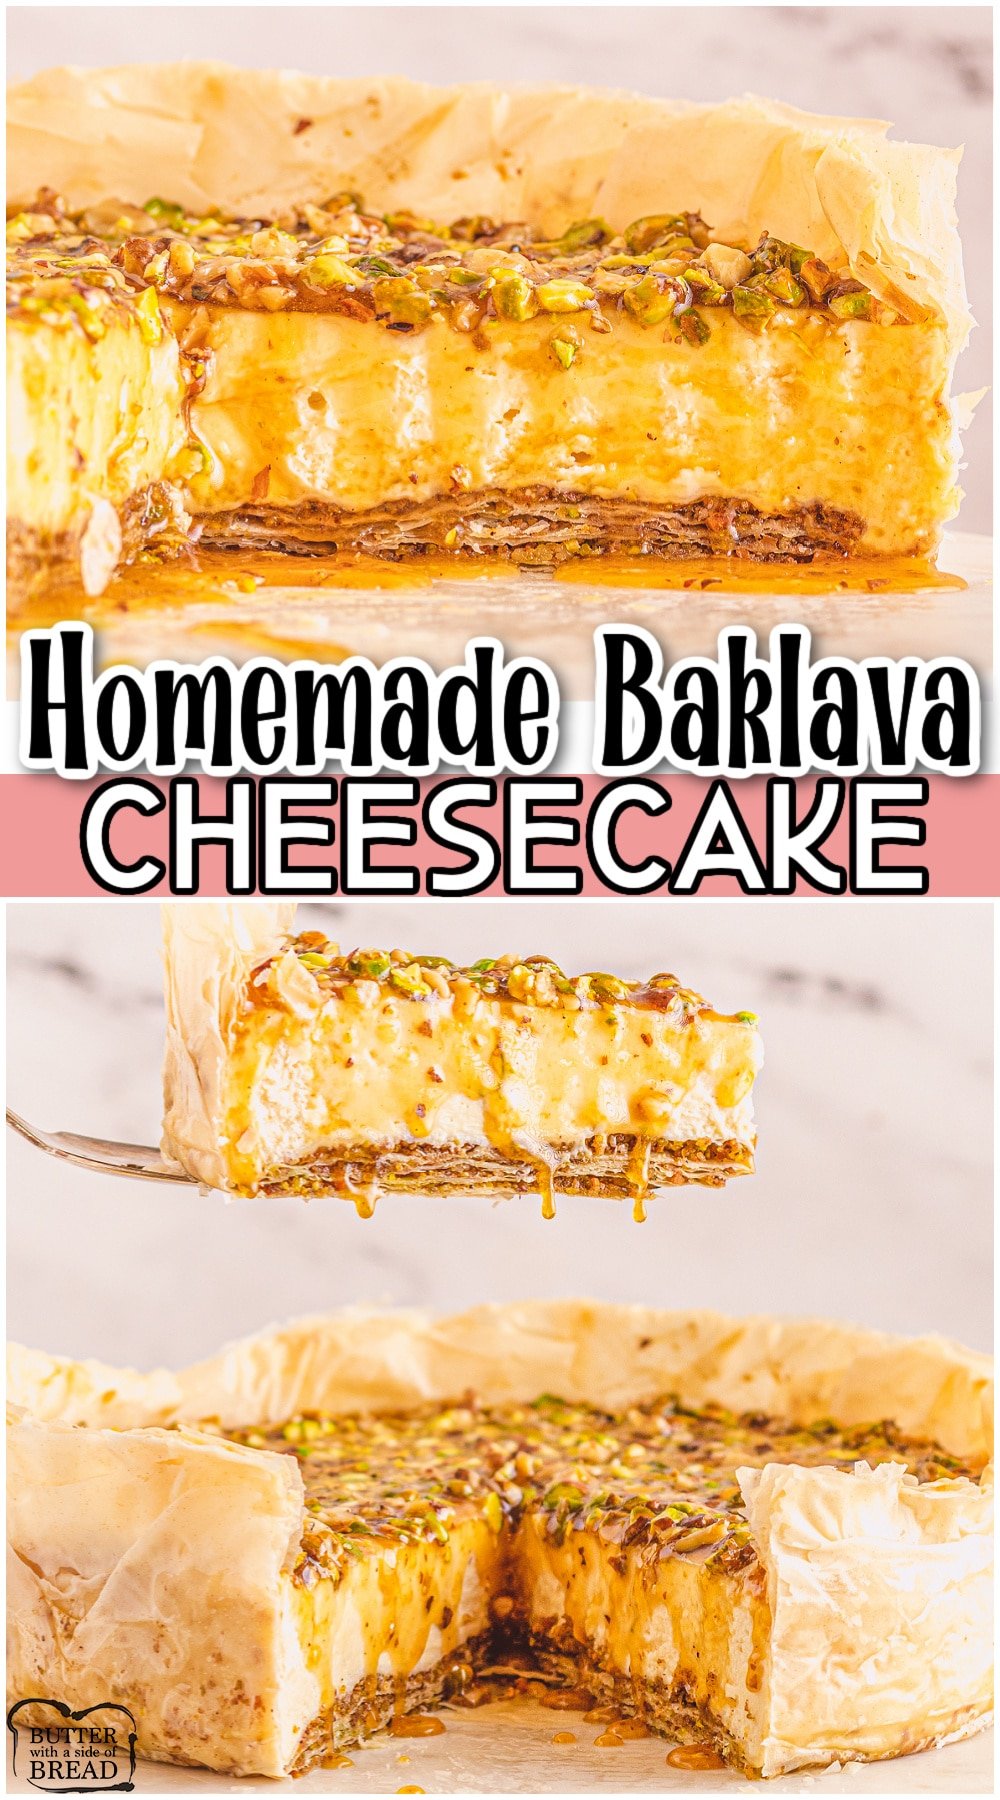 Baklava Cheesecake is everything you love about Baklava in cheesecake form! This Greek Baklava cheesecake is a perfect blend of buttery phyllo dough, sweet honey, crunchy nuts, and creamy rich cheesecake!